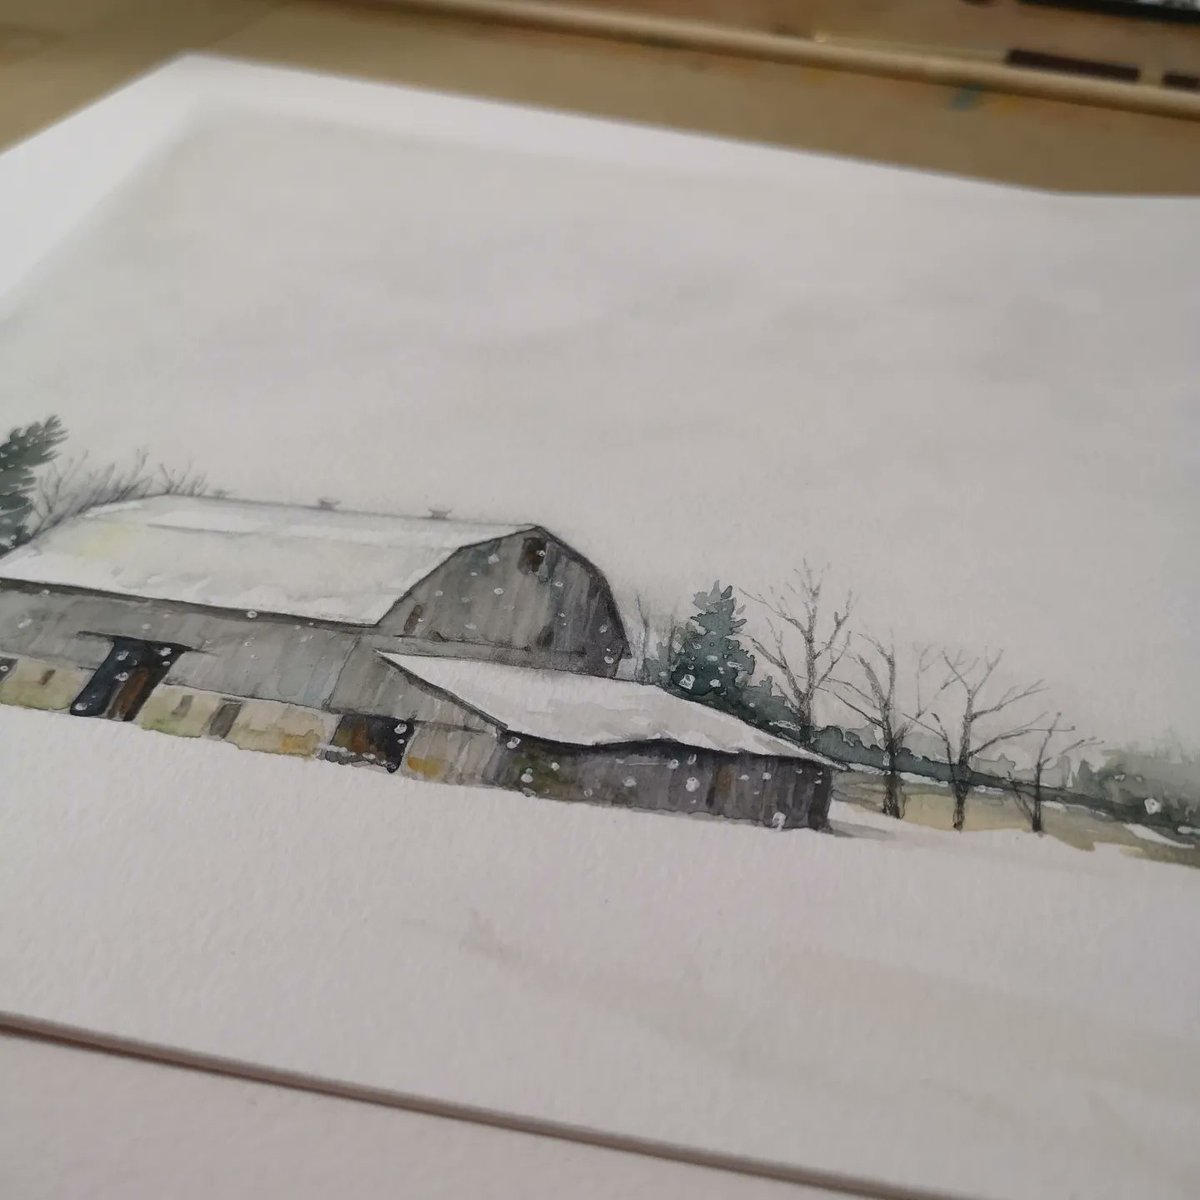 Somewhere in #Chathamkent...
#watercolorpainting #barn #winterlandscape